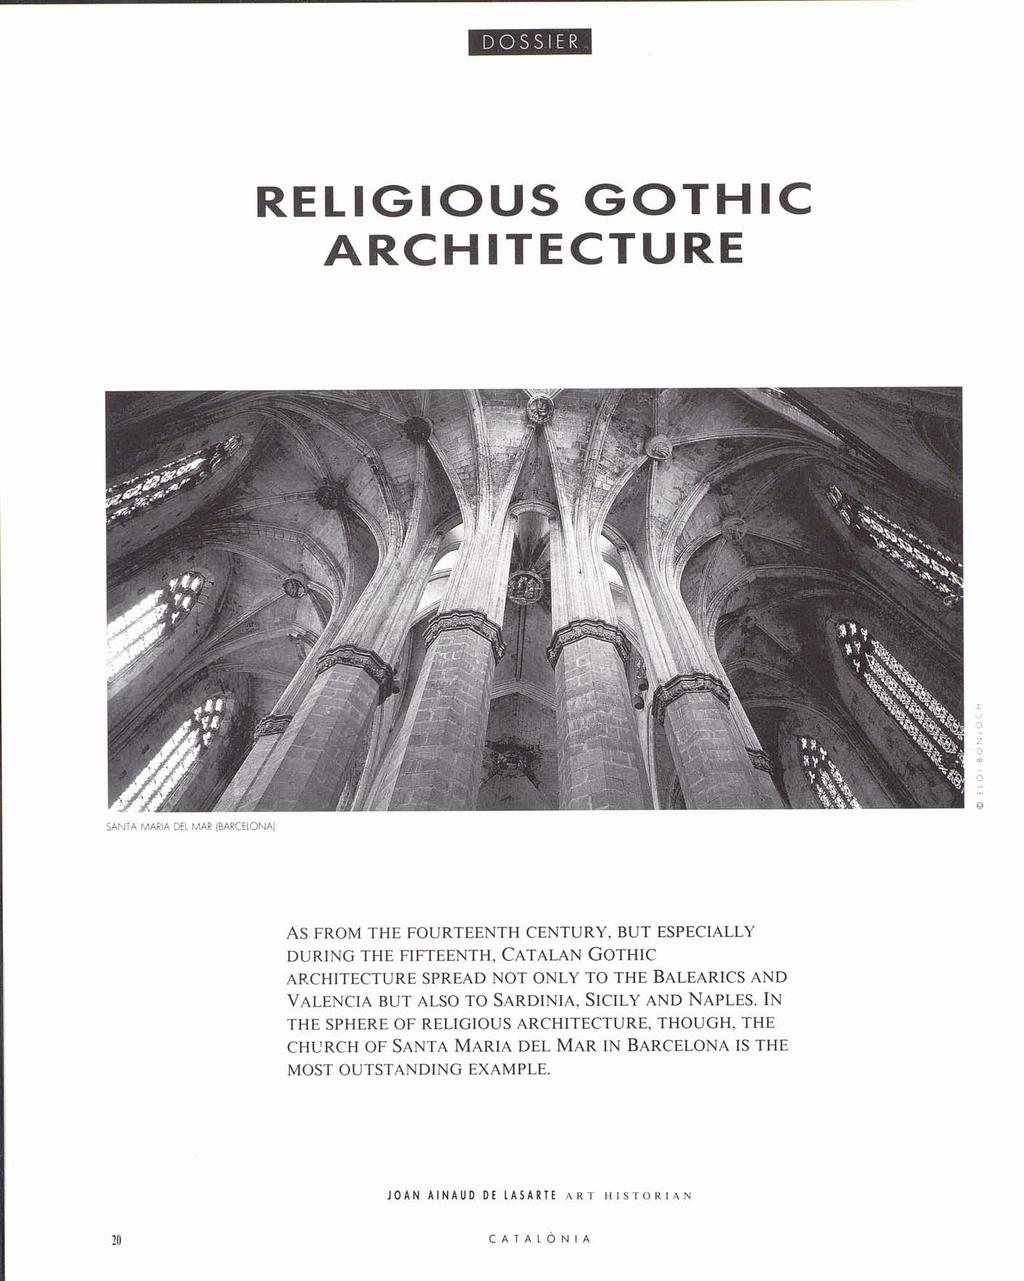 RELIGIOUS GOTHIC ARCHITECTURE AS FROM THE FOURTEENTH CENTURY, BUT ESPECIALLY DURING THE FIFTEENTH, CATALAN GOTHIC ARCHITECTURE SPREAD NOT ONLY TO THE BALEARICS AND VALENCIA BUT ALSO TO SARDINIA,